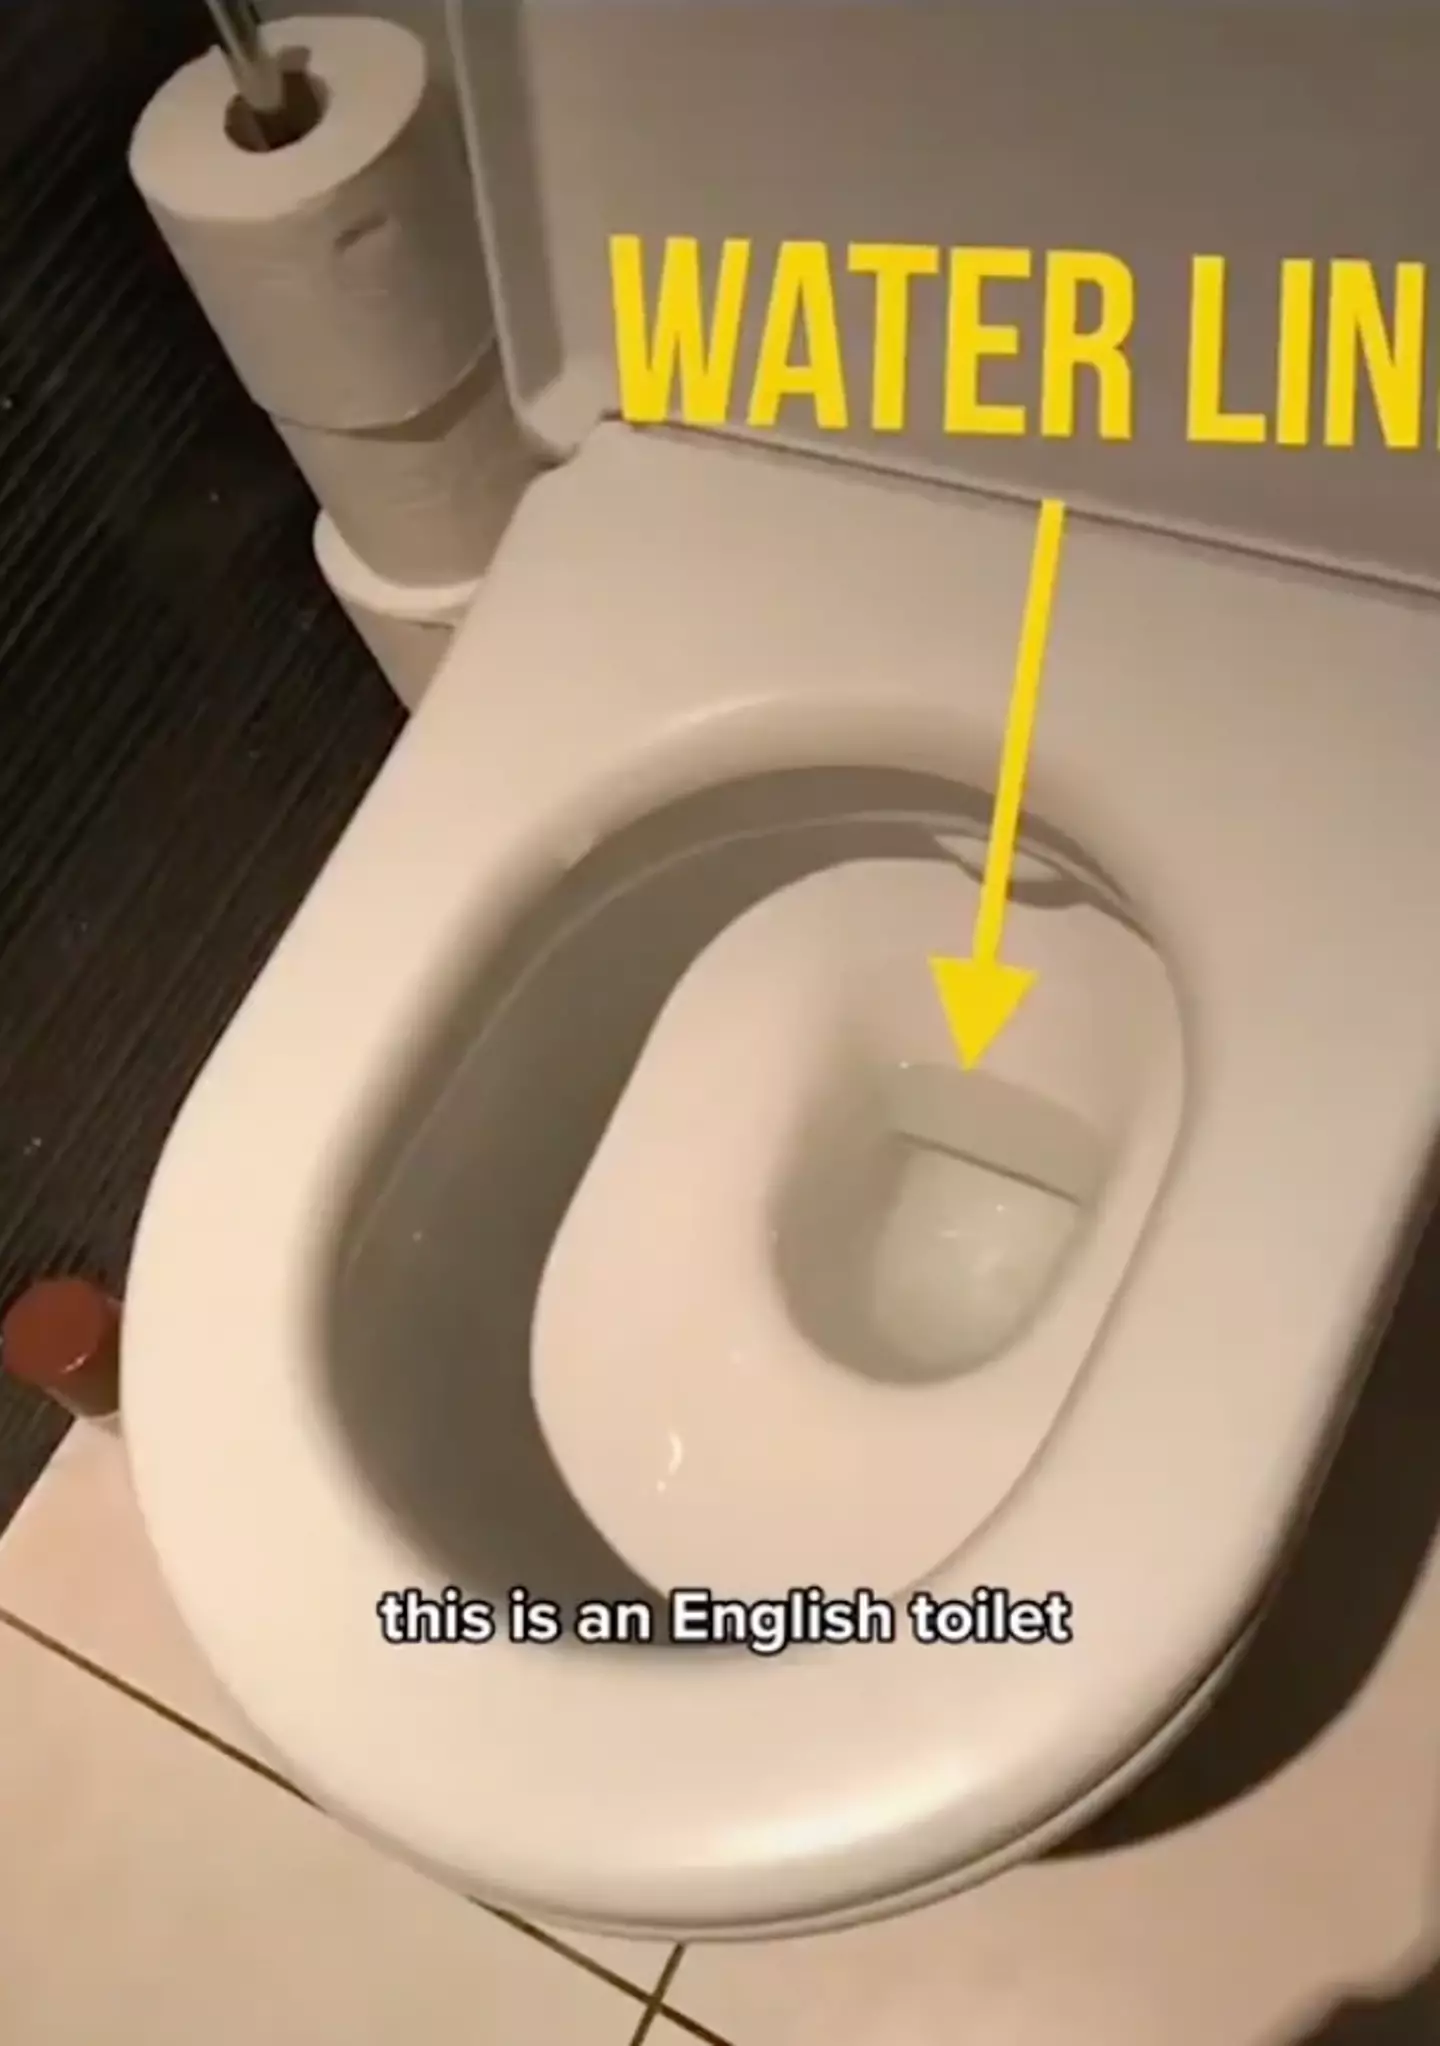 UK toilets have a much less offensive water level.